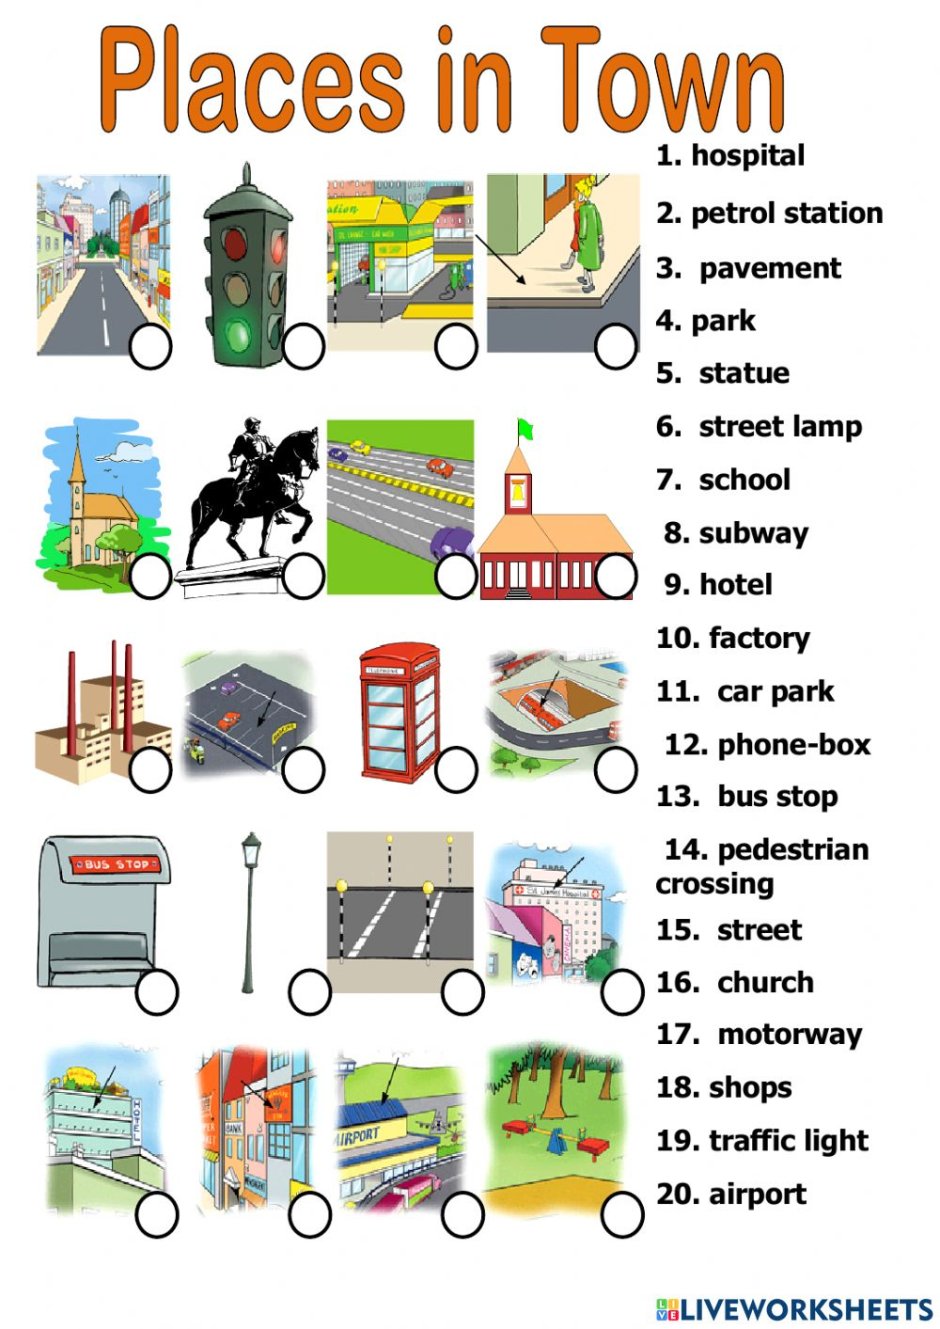 Match the signs to the shops